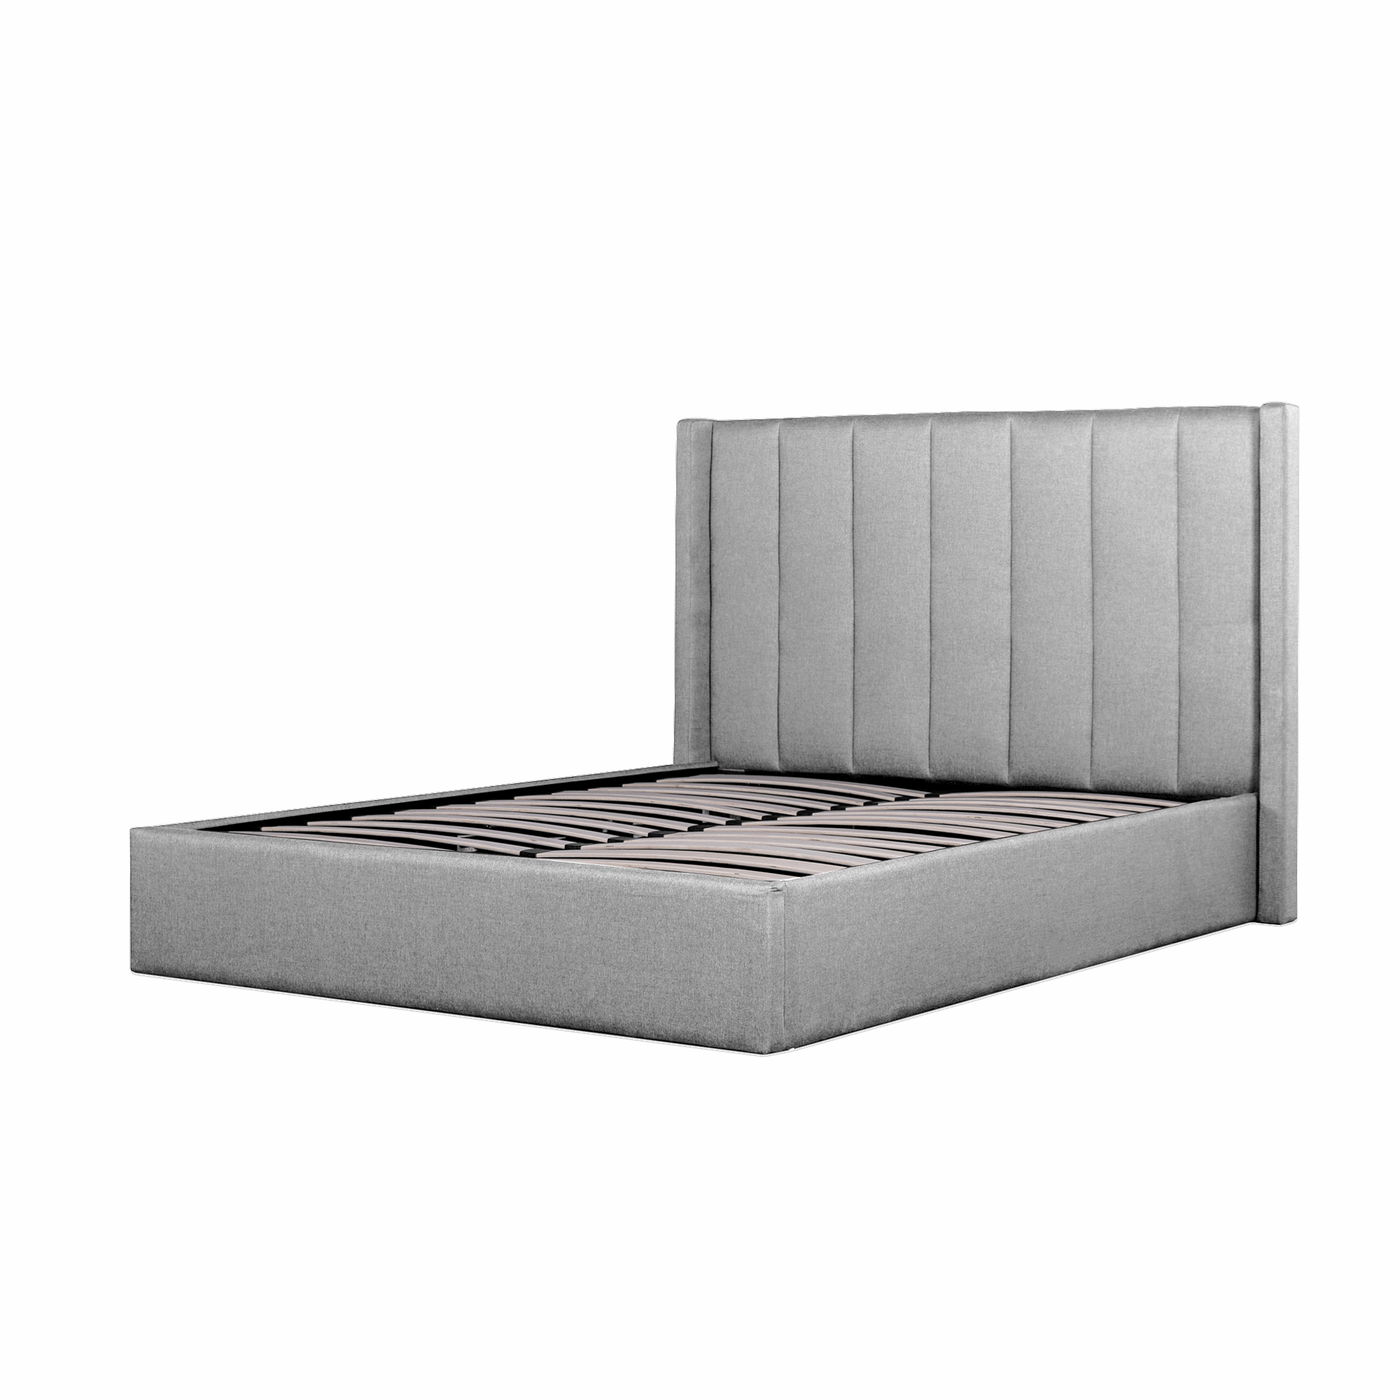 Fabric King Bed Frame - Pearl Grey with Storage